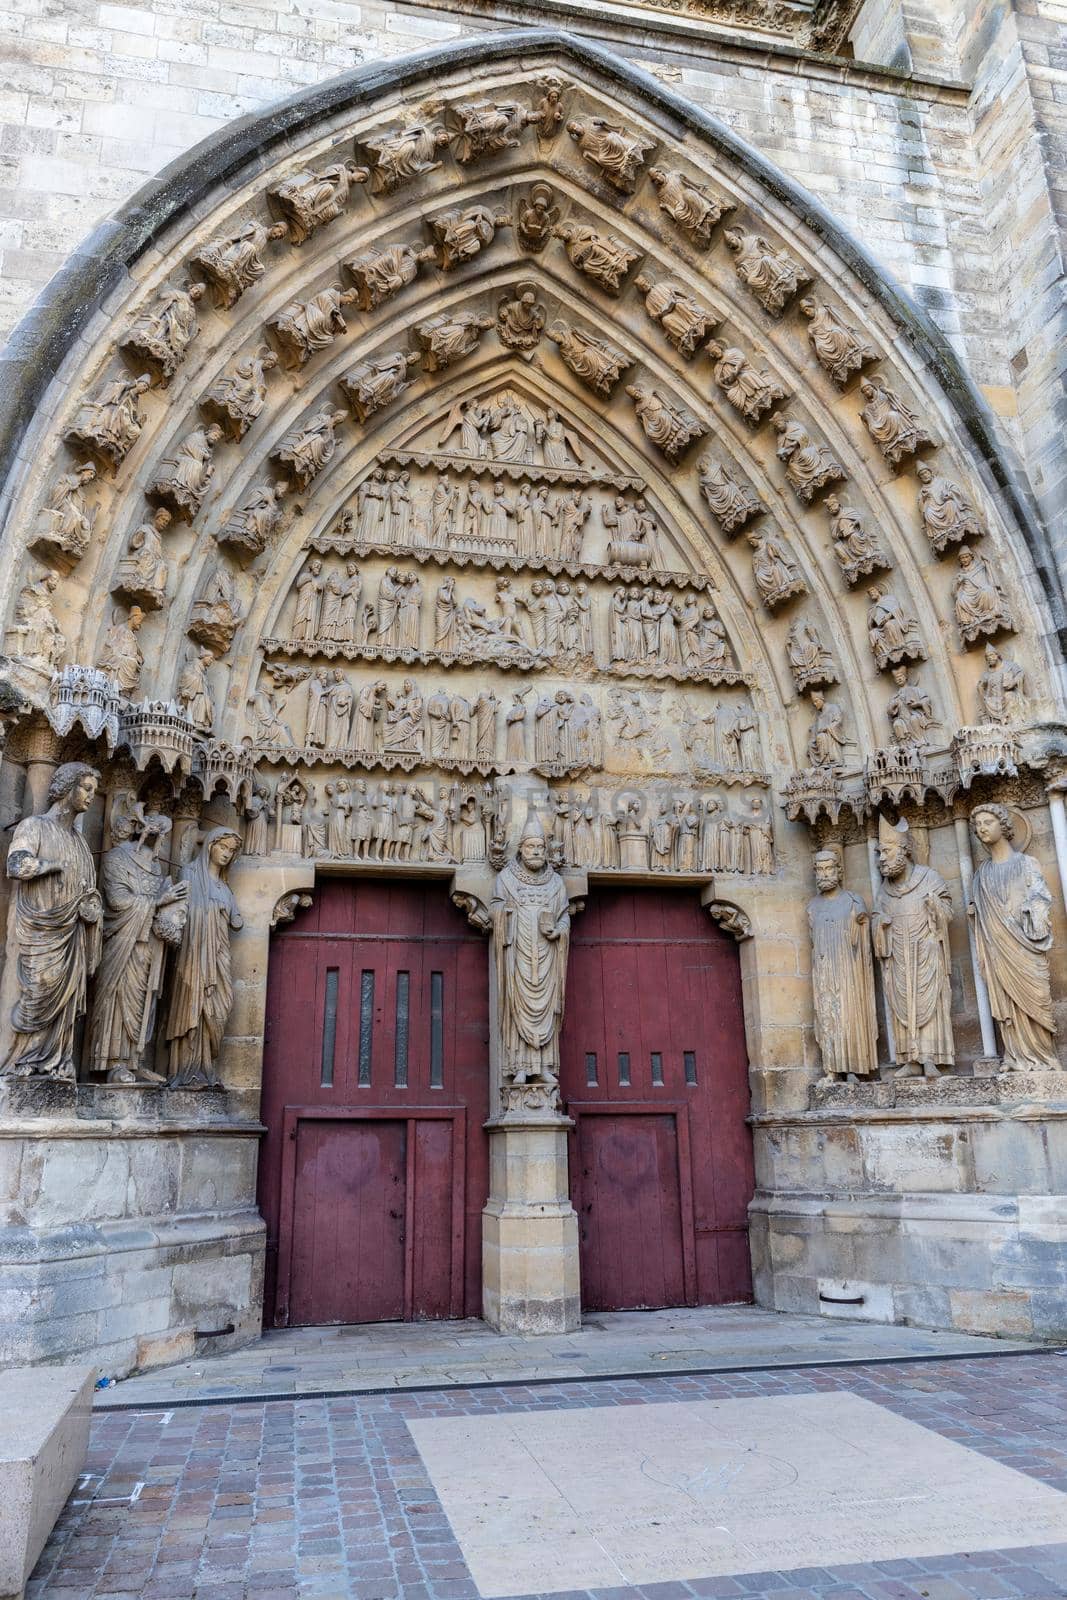 View at portal of cathedral Notre Dame in Reims, France